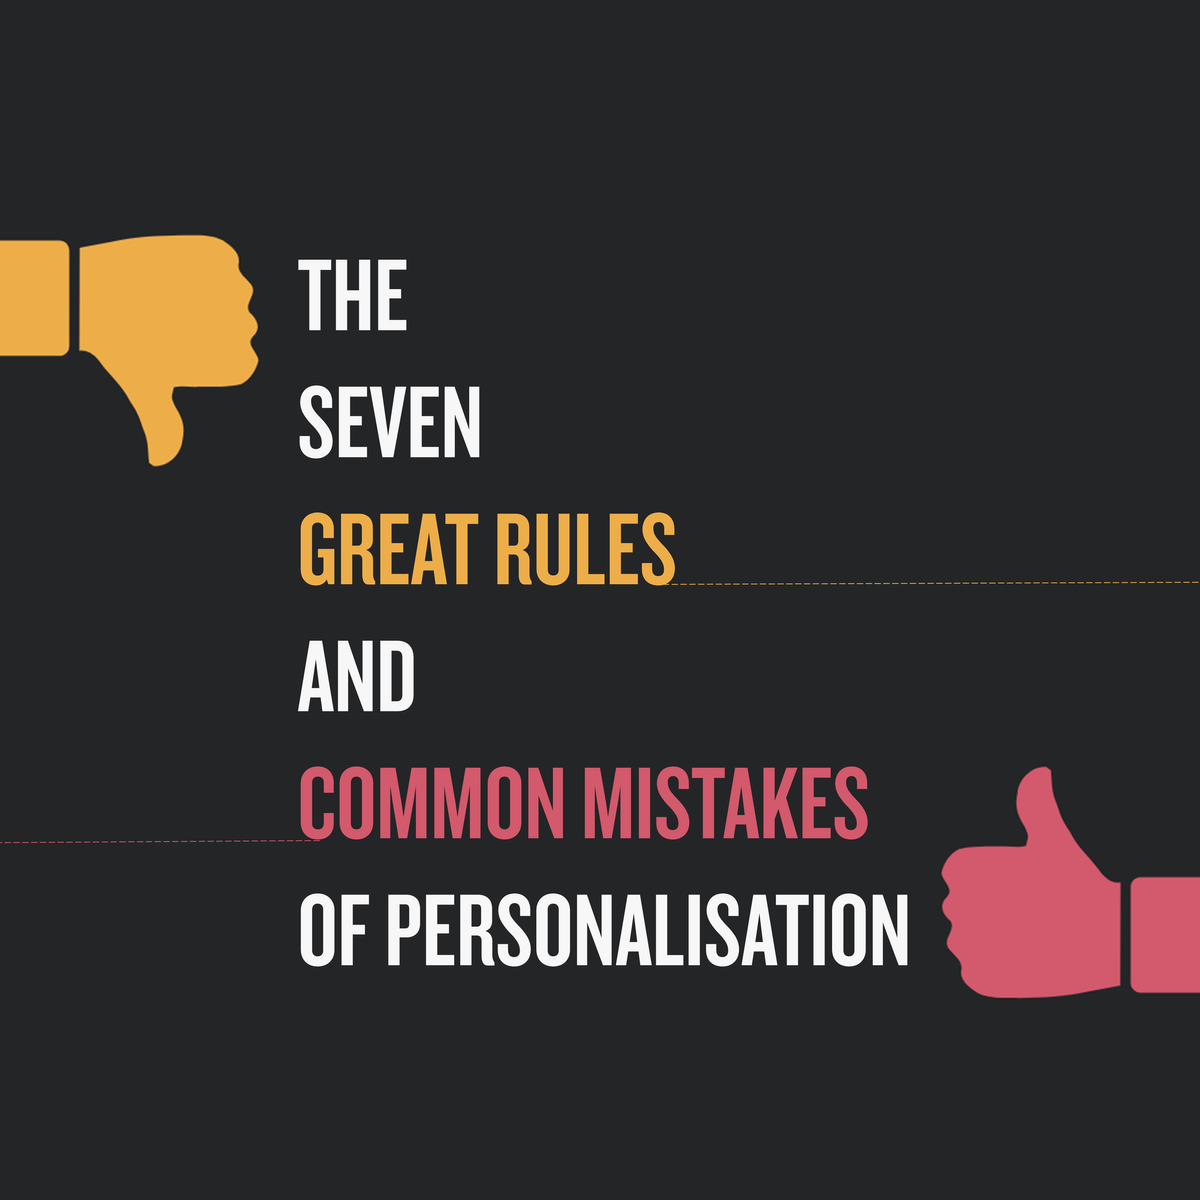 The Seven Great Rules And Common Mistakes Of Personalization